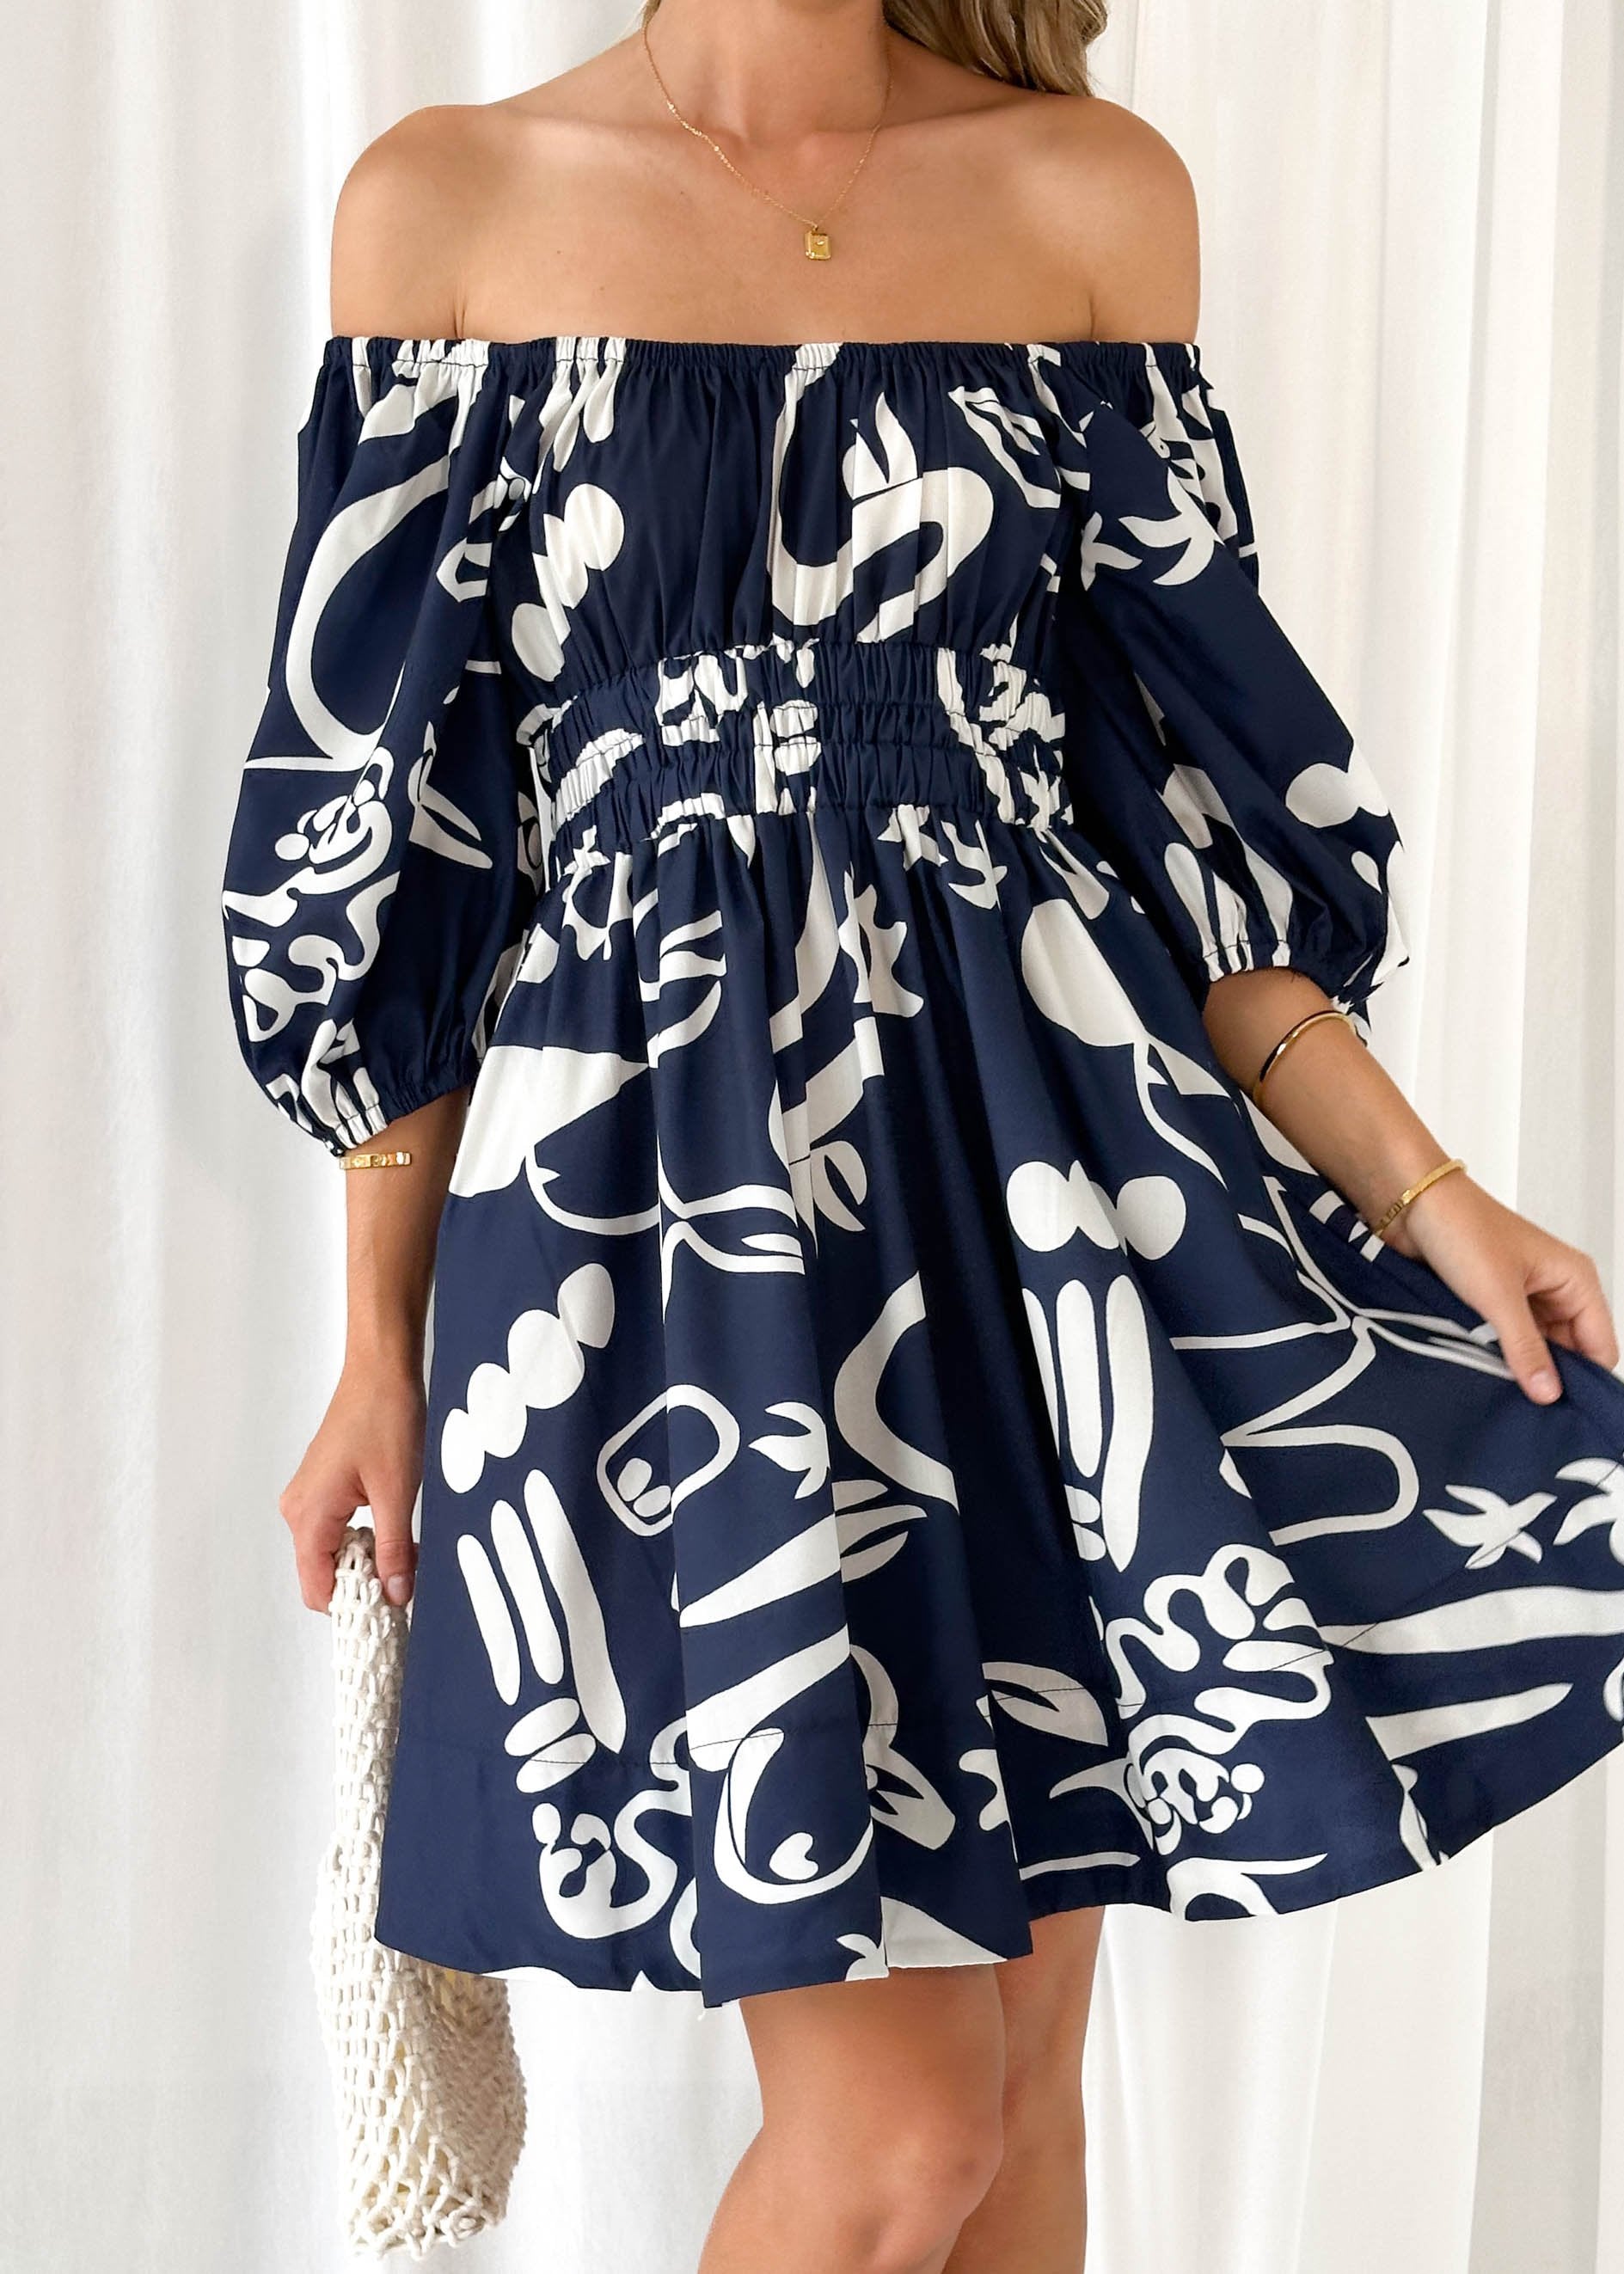 Stassio Dress - Navy Abstract